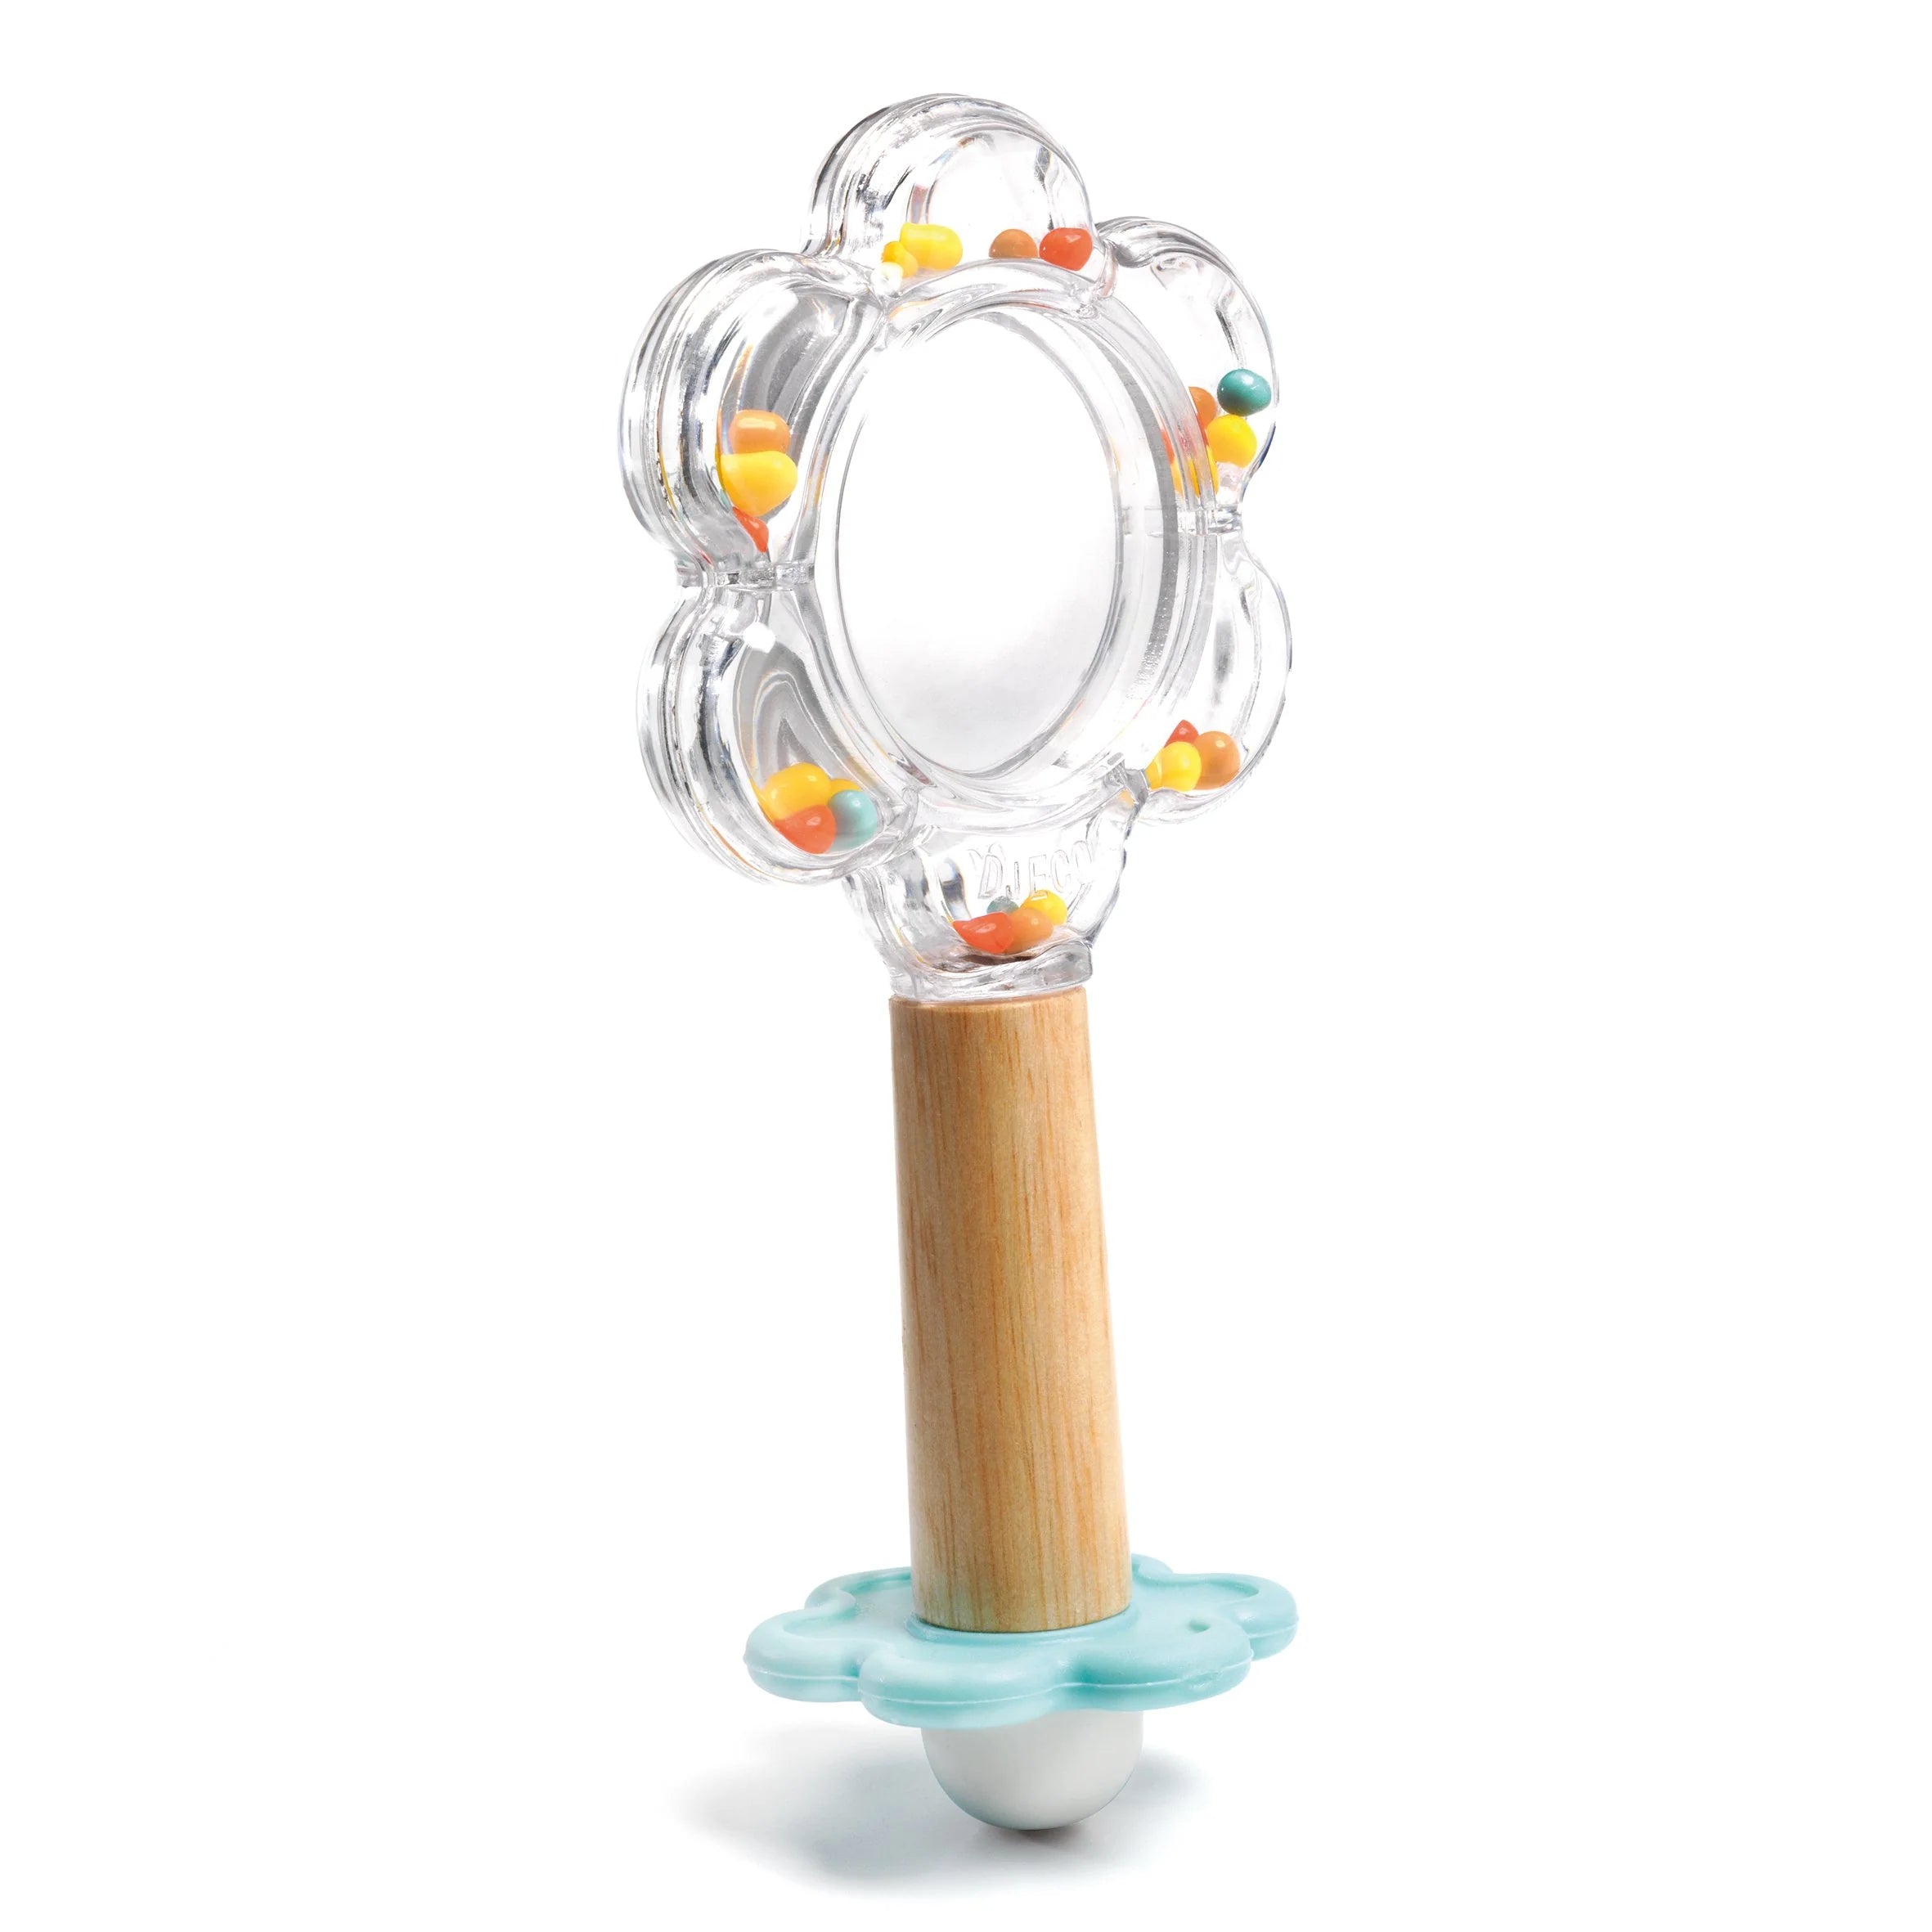 back of rattle with mirror